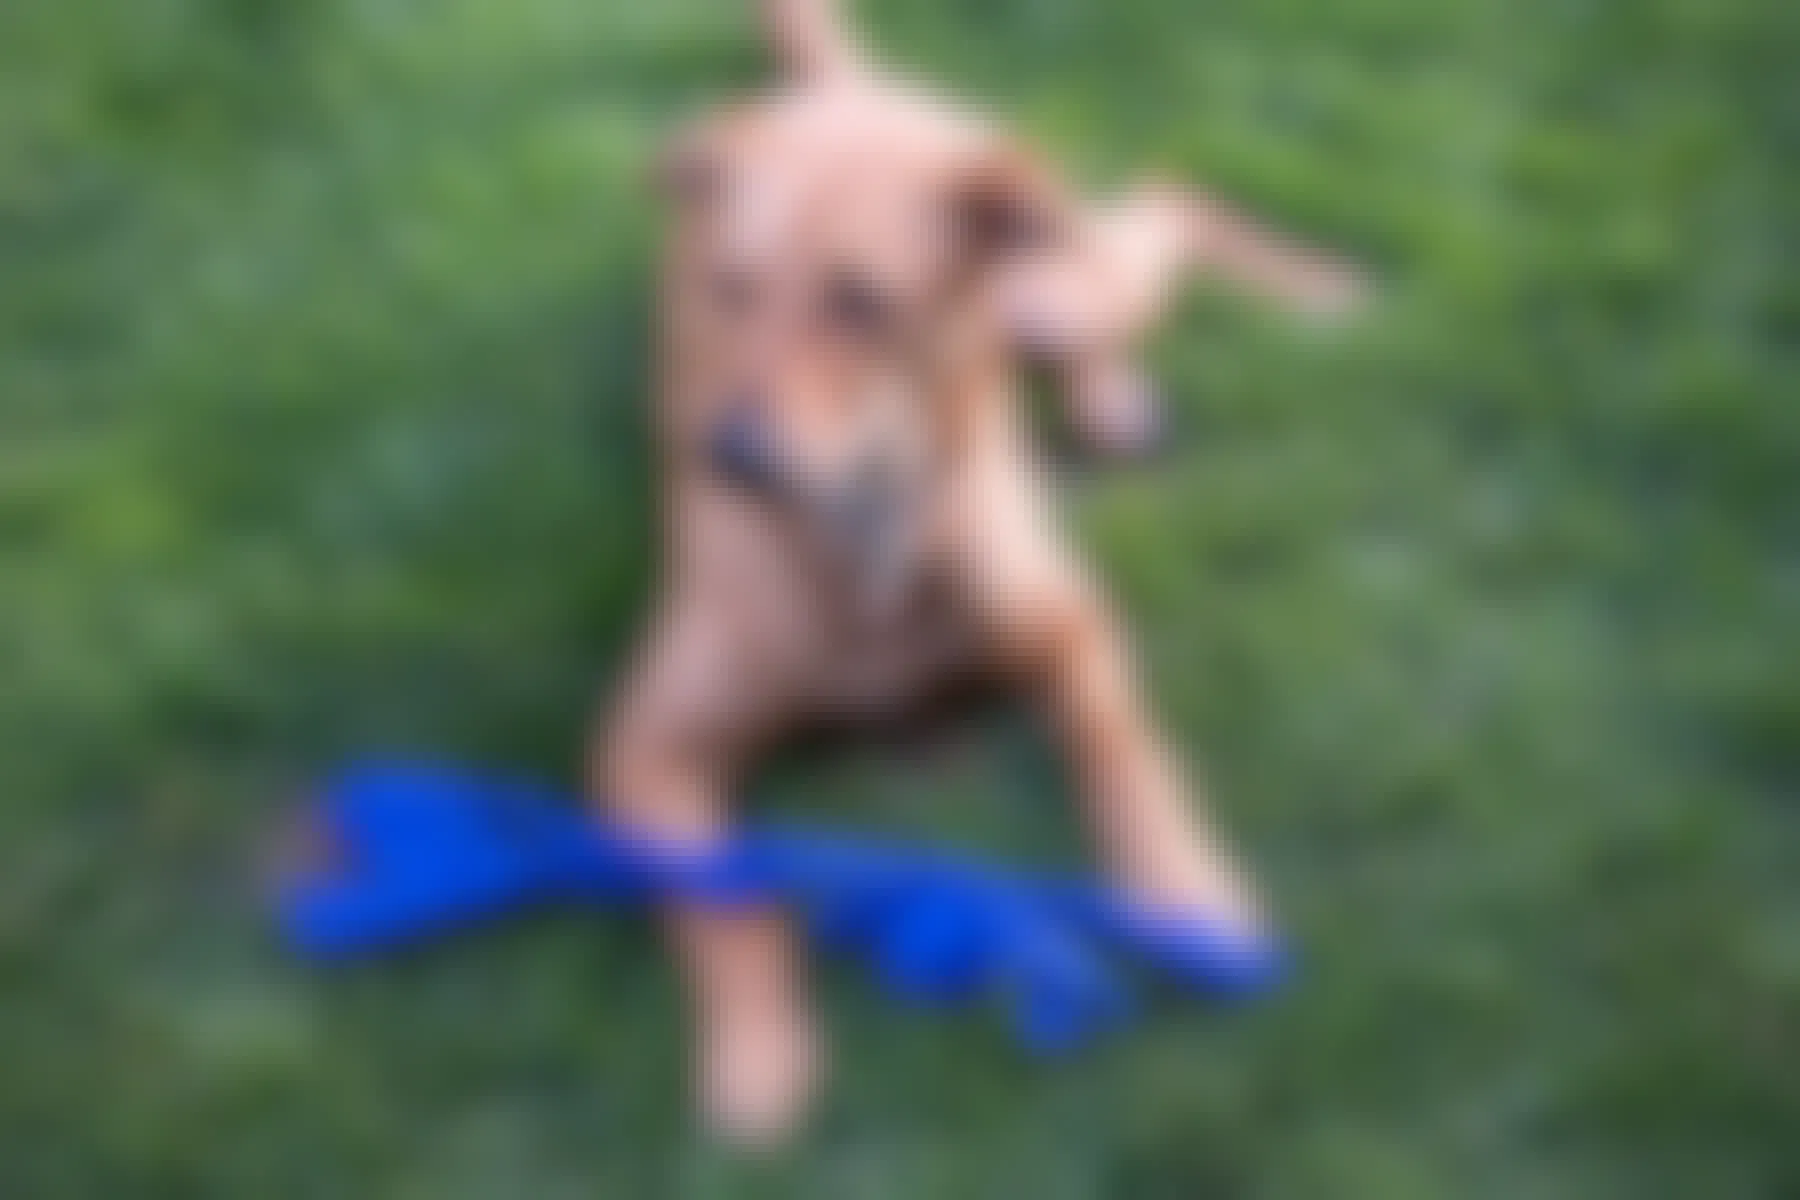 A dog laying on grass with a blue rope toy.